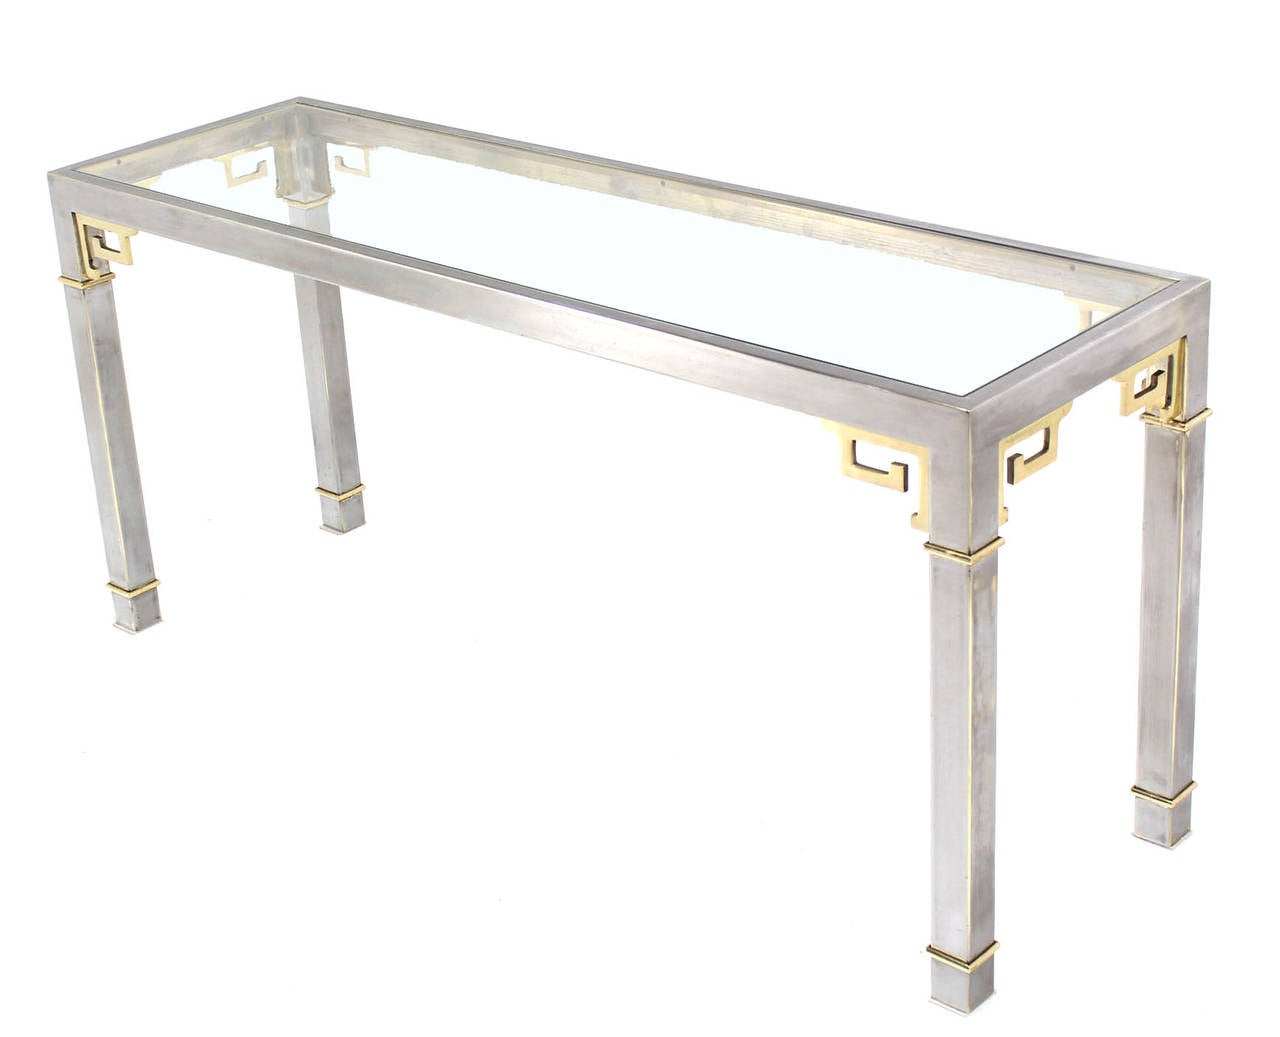 Chrome Brass and Glass Greek Key Design Console Table by Mastercraft